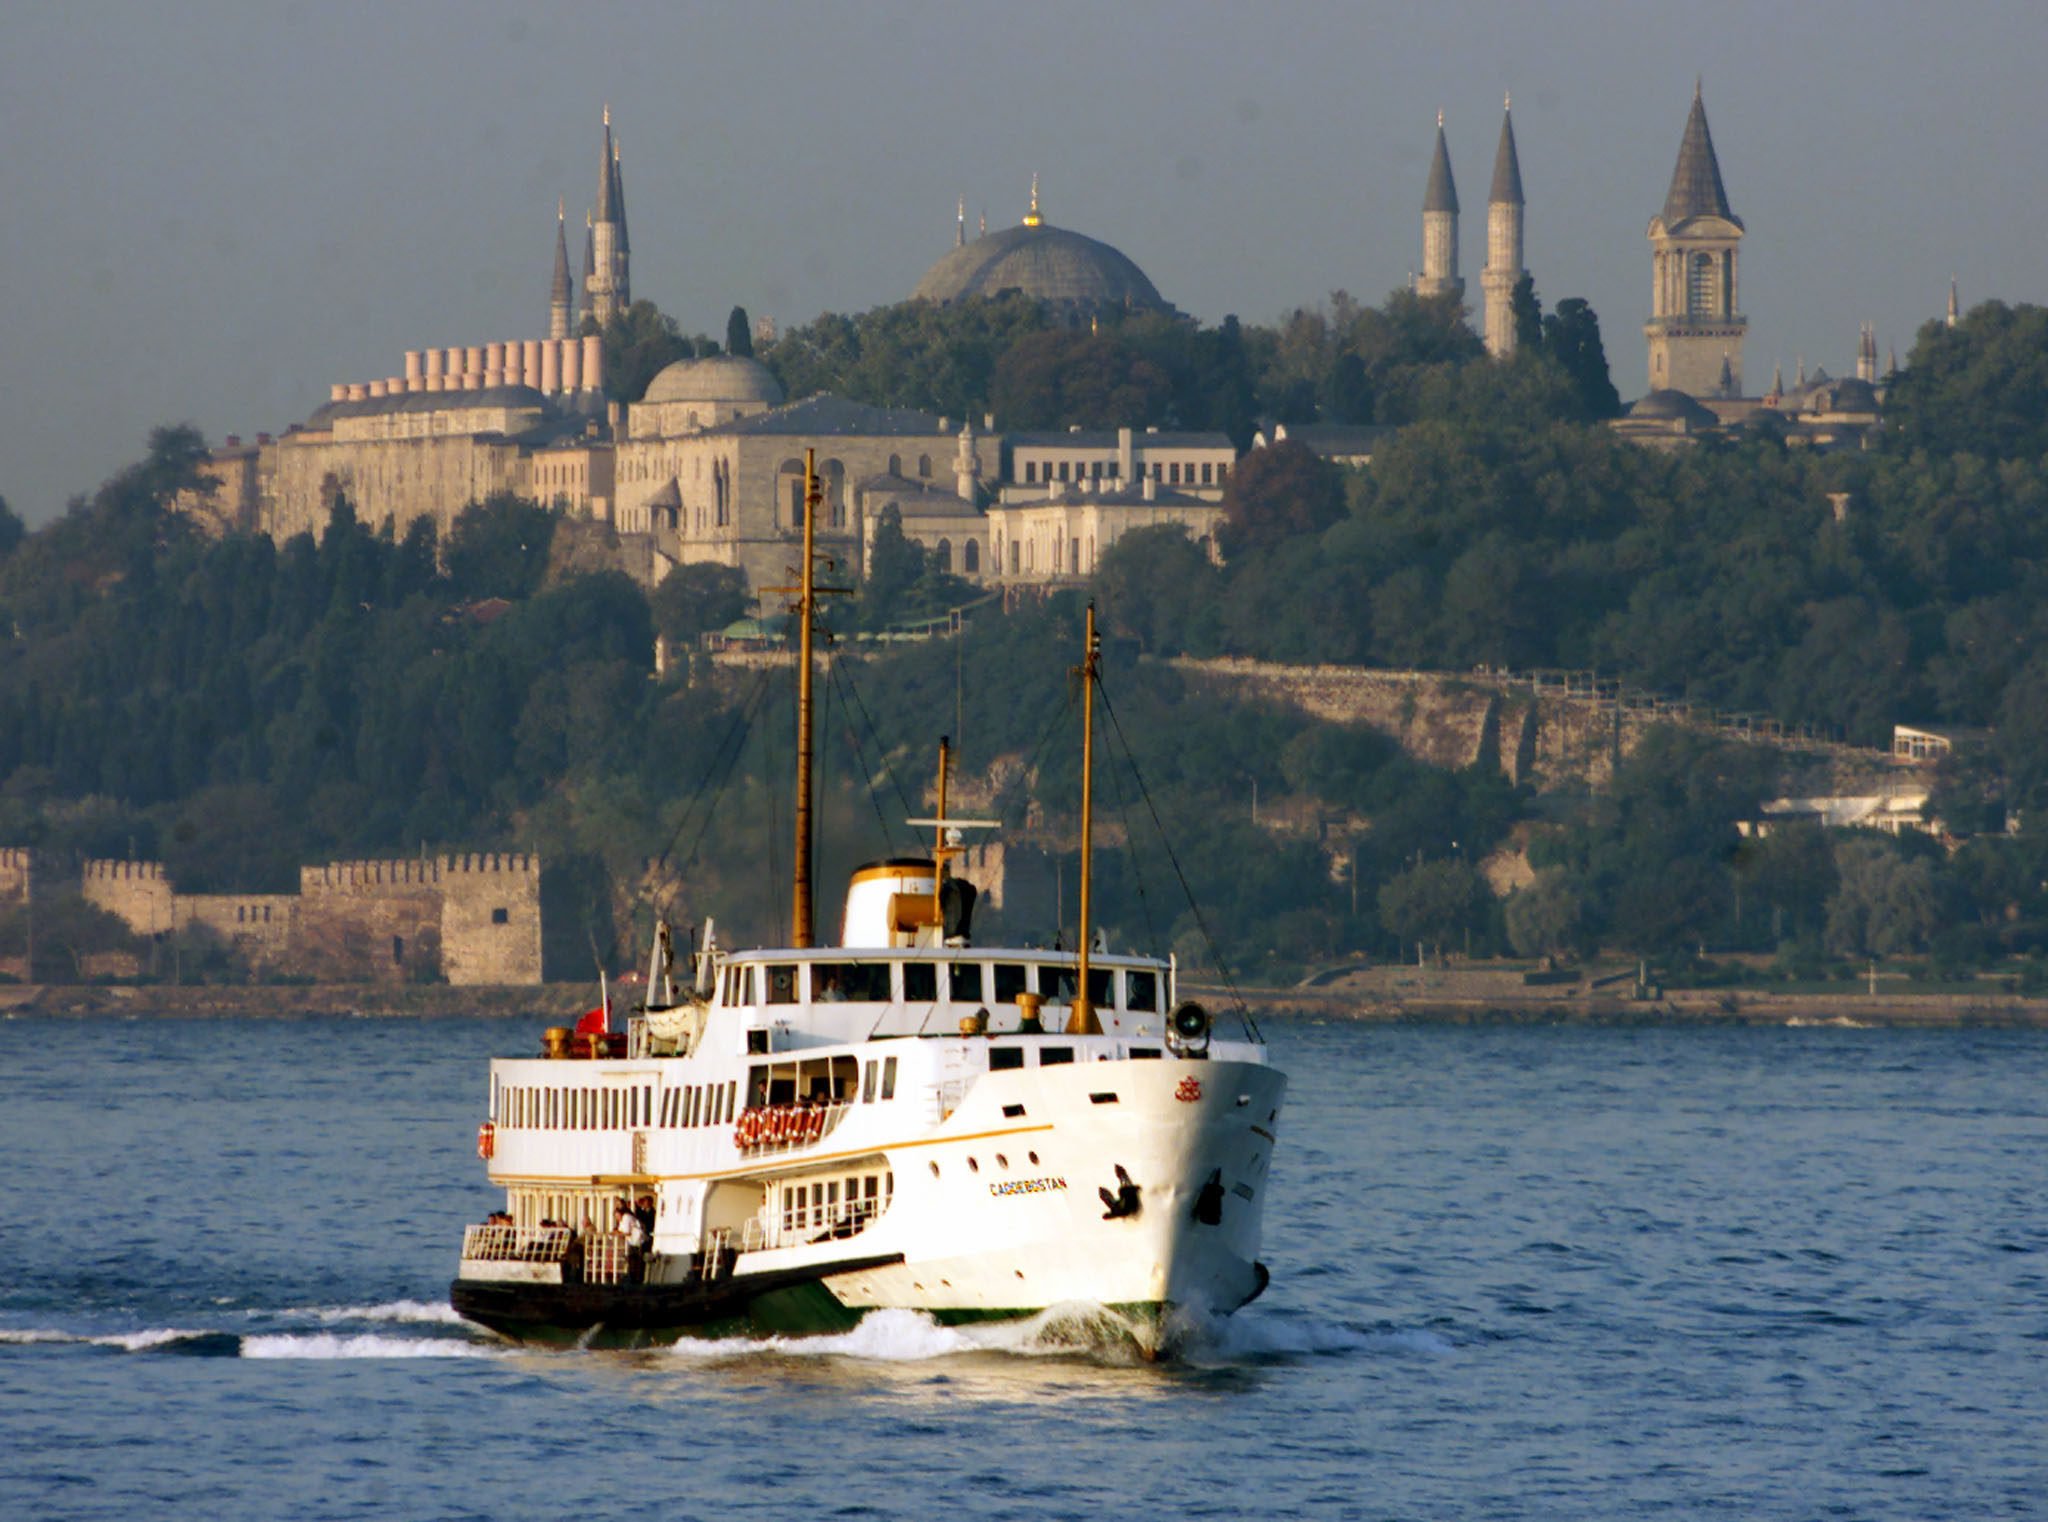 A Turkish commuter ferry sails past the Ottoman palace of Topkapi overlooking the Bosphorus straits in Istanbul. Photo: Reuters